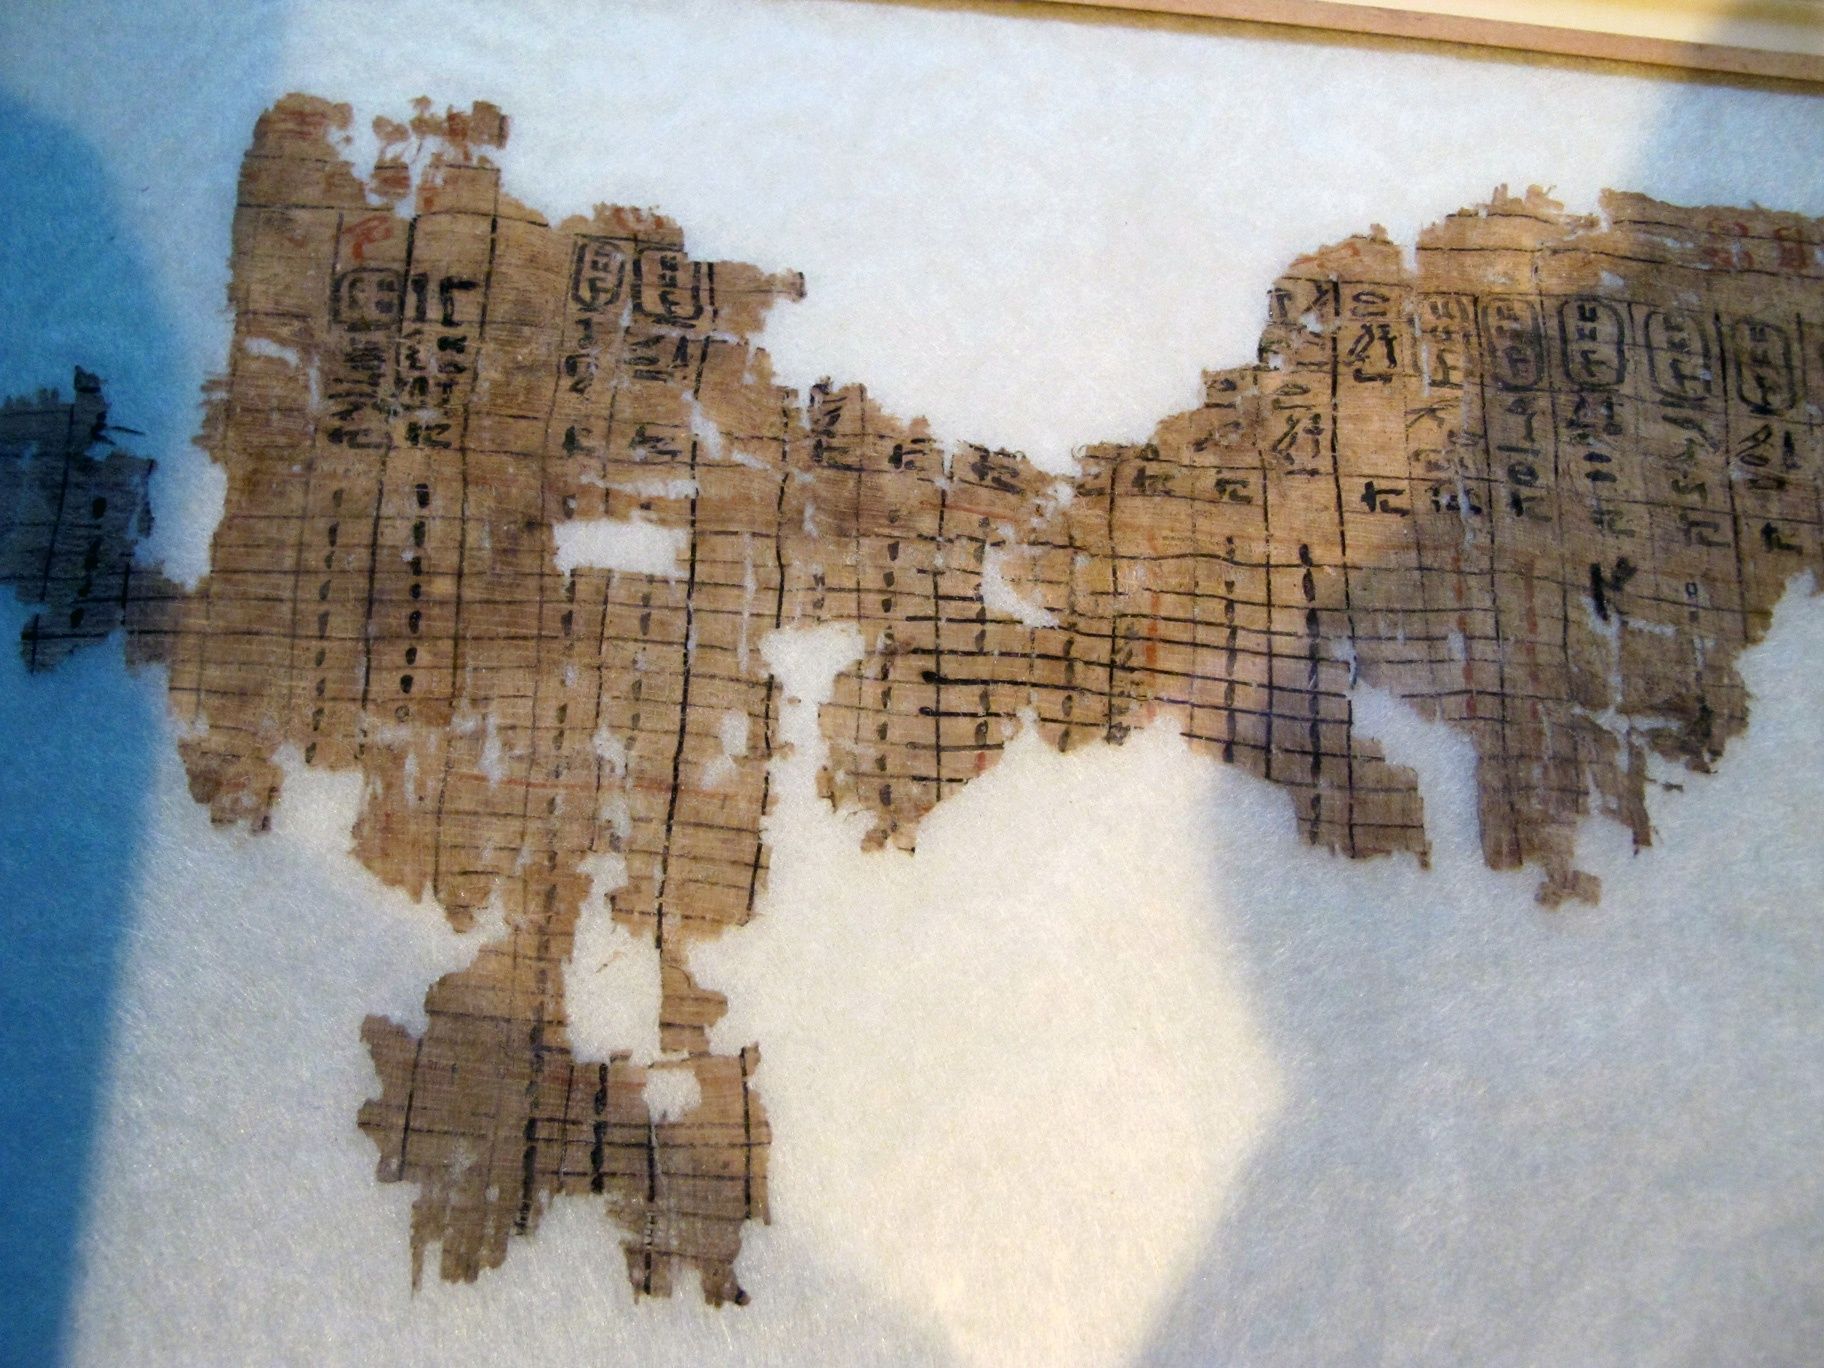 The oldest piece of penmanship in the world is an Egyptian spreadsheet